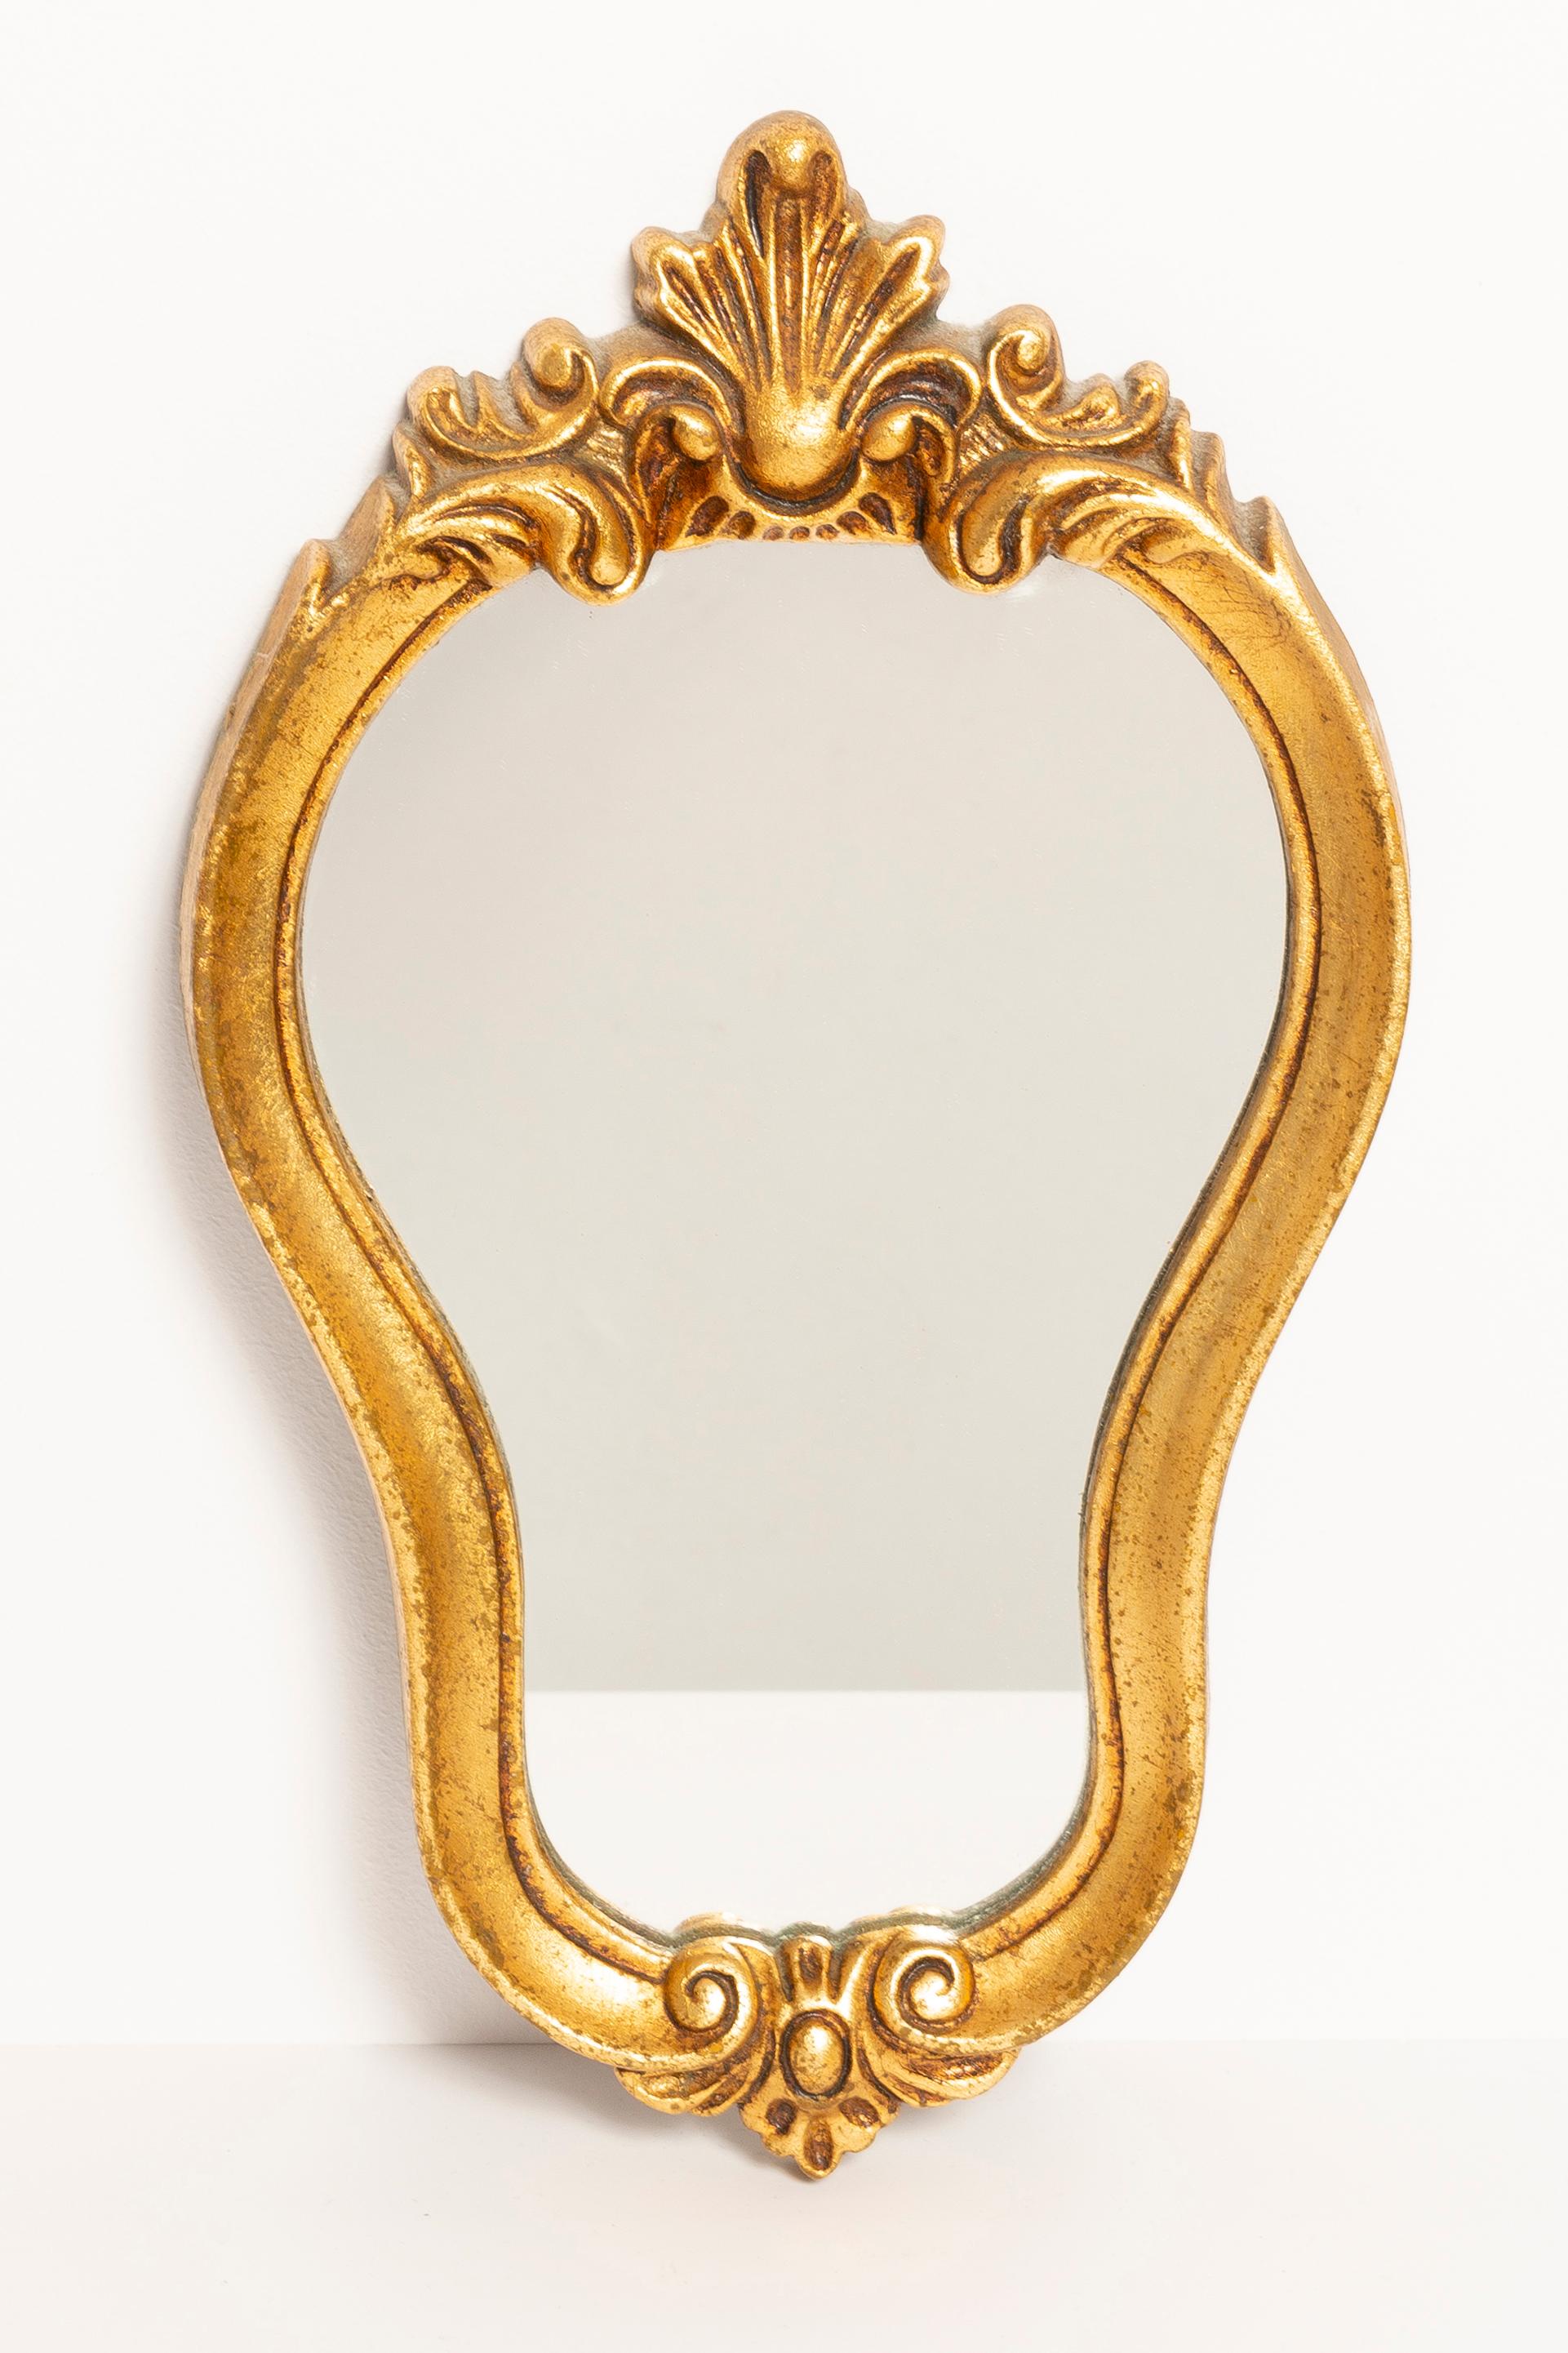 A beautiful small mirror in a golden decorative frame with flowers. Produced in 1960s in Europe/Italy. The frame is made of wood, painted in gold wood paint. Mirror is in very good vintage condition, no damage or cracks in the frame. Original glass.